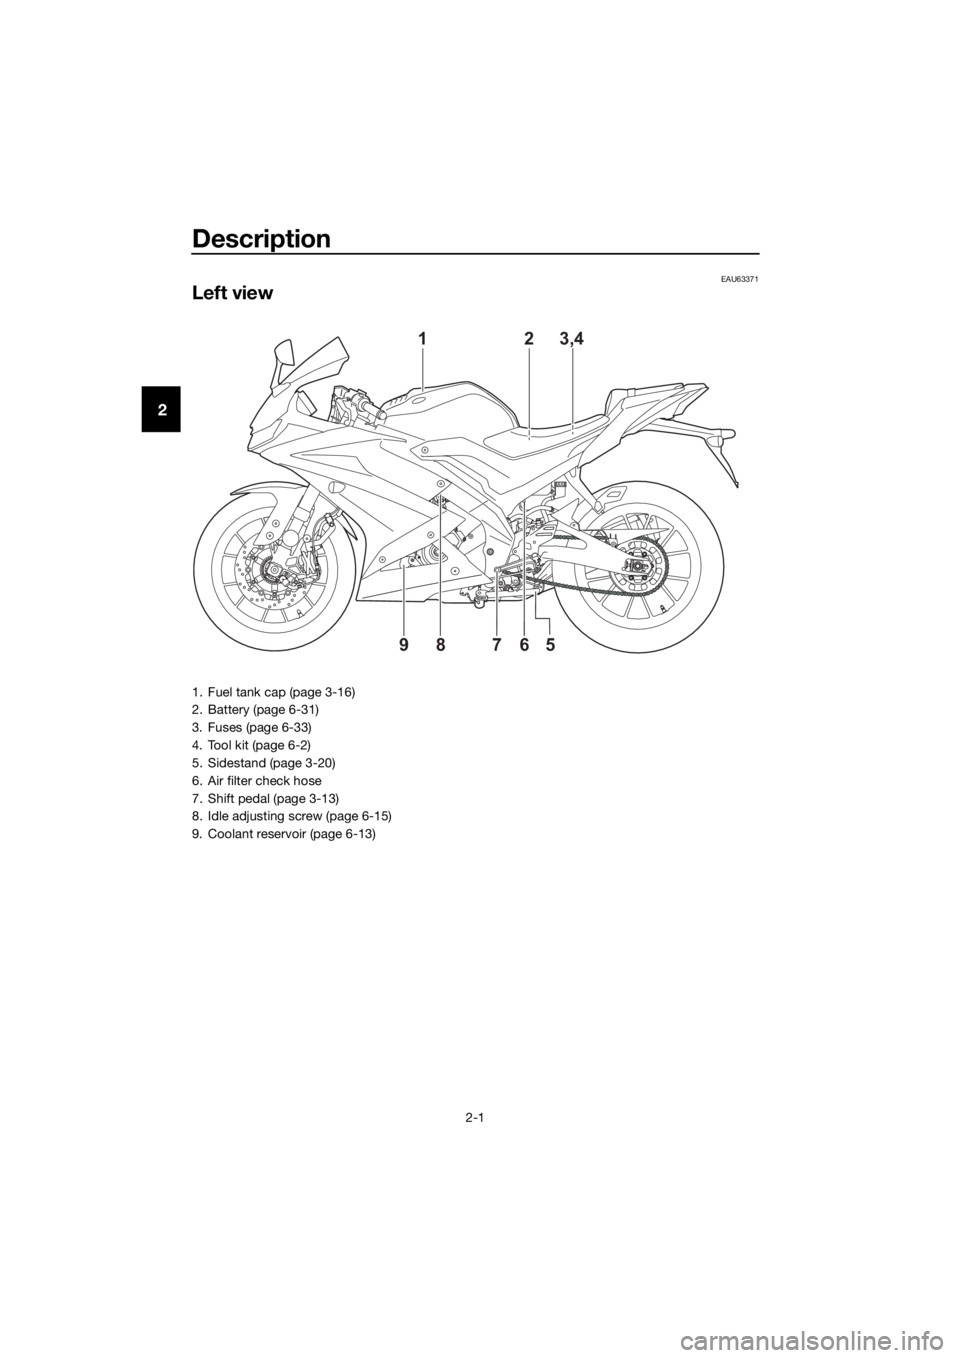 YAMAHA YZF-R125 2020  Owners Manual Description
2-1
2
EAU63371
Left view
5 9678
23,4 1
1. Fuel tank cap (page 3-16)
2. Battery (page 6-31)
3. Fuses (page 6-33)
4. Tool kit (page 6-2)
5. Sidestand (page 3-20)
6. Air filter check hose
7. 